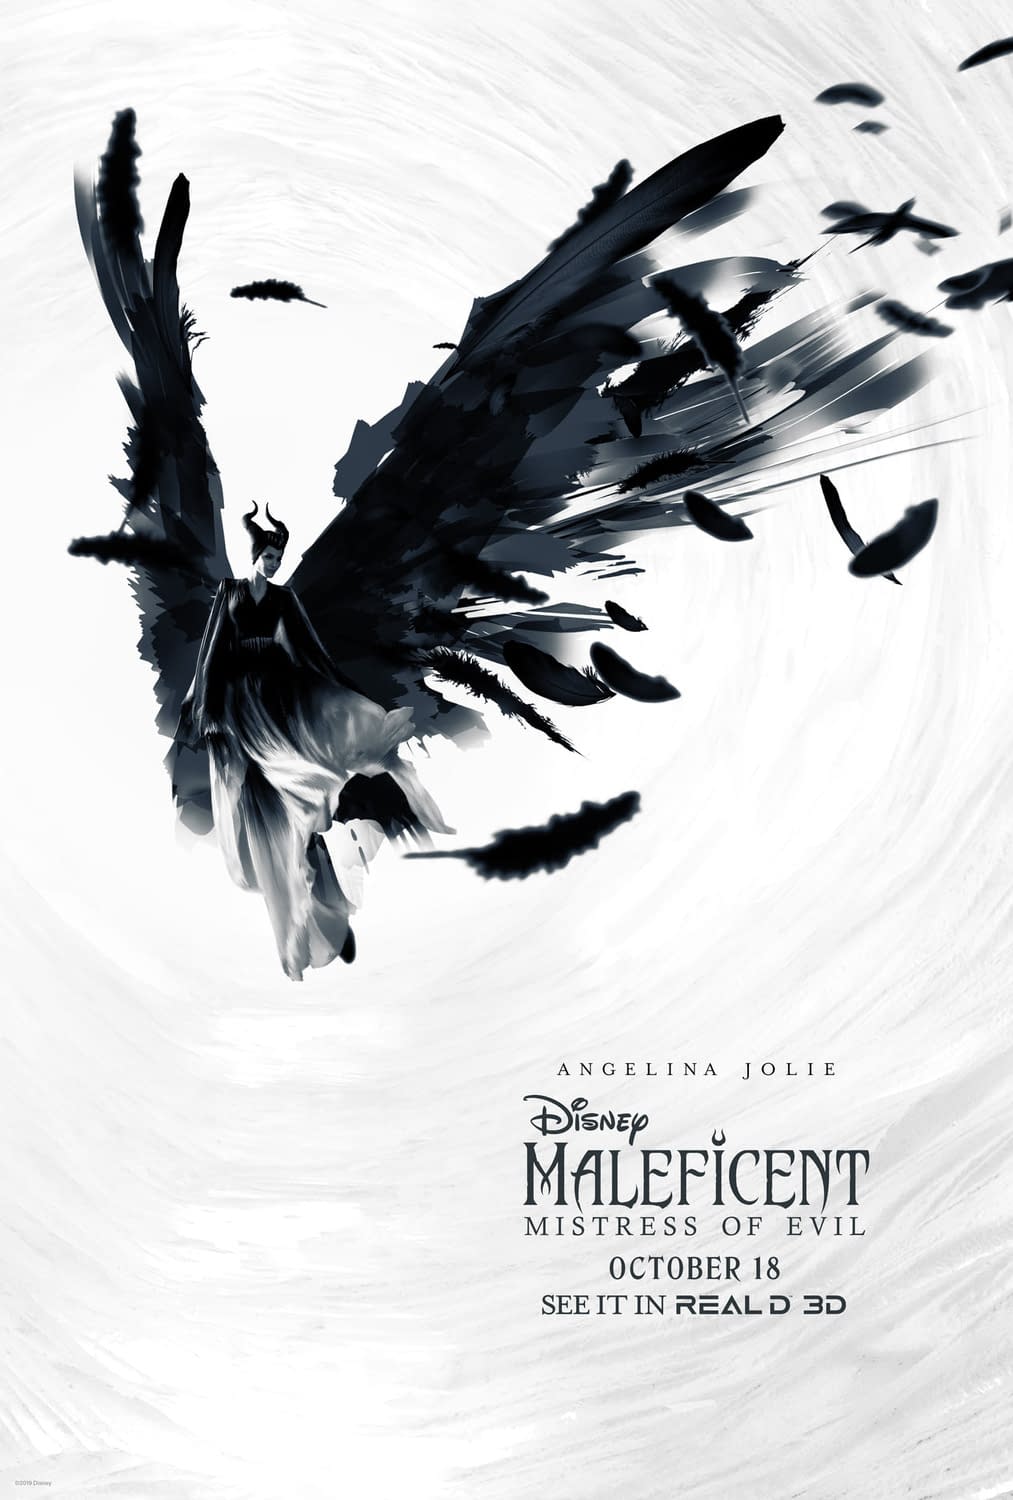 New Posters and TV Spot for "Maleficent: Mistress of Evil"